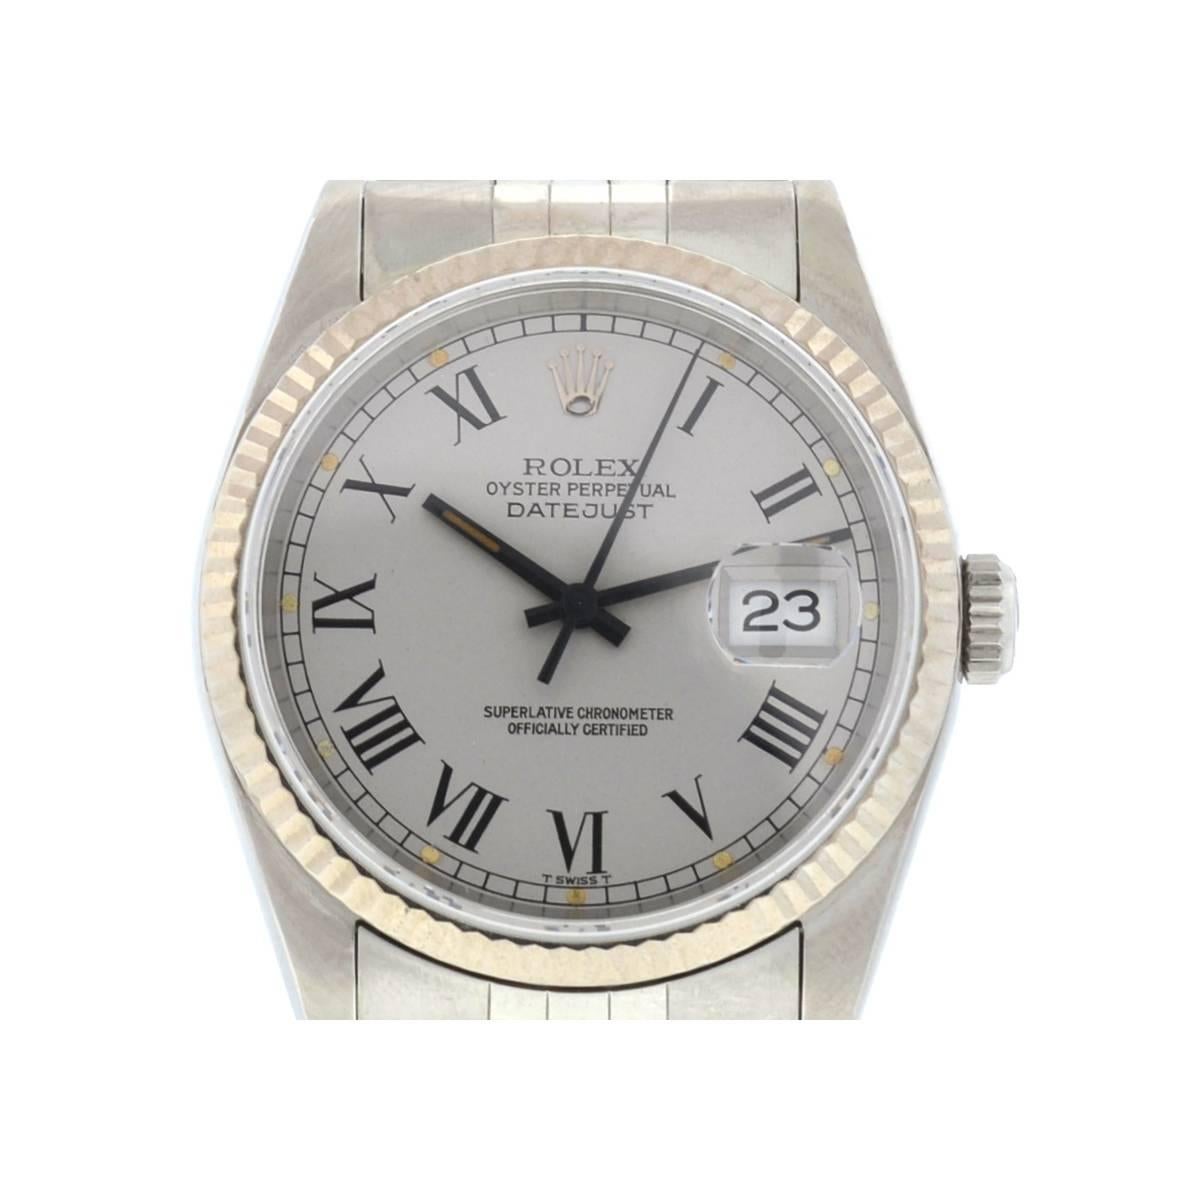 Company-Rolex
Style-Luxury Watch
Model-Datejust
Reference Number-16234
Case Metal-Stainless Steel
Case Measurement-36mm
Bracelet-Stainless Steel - 7